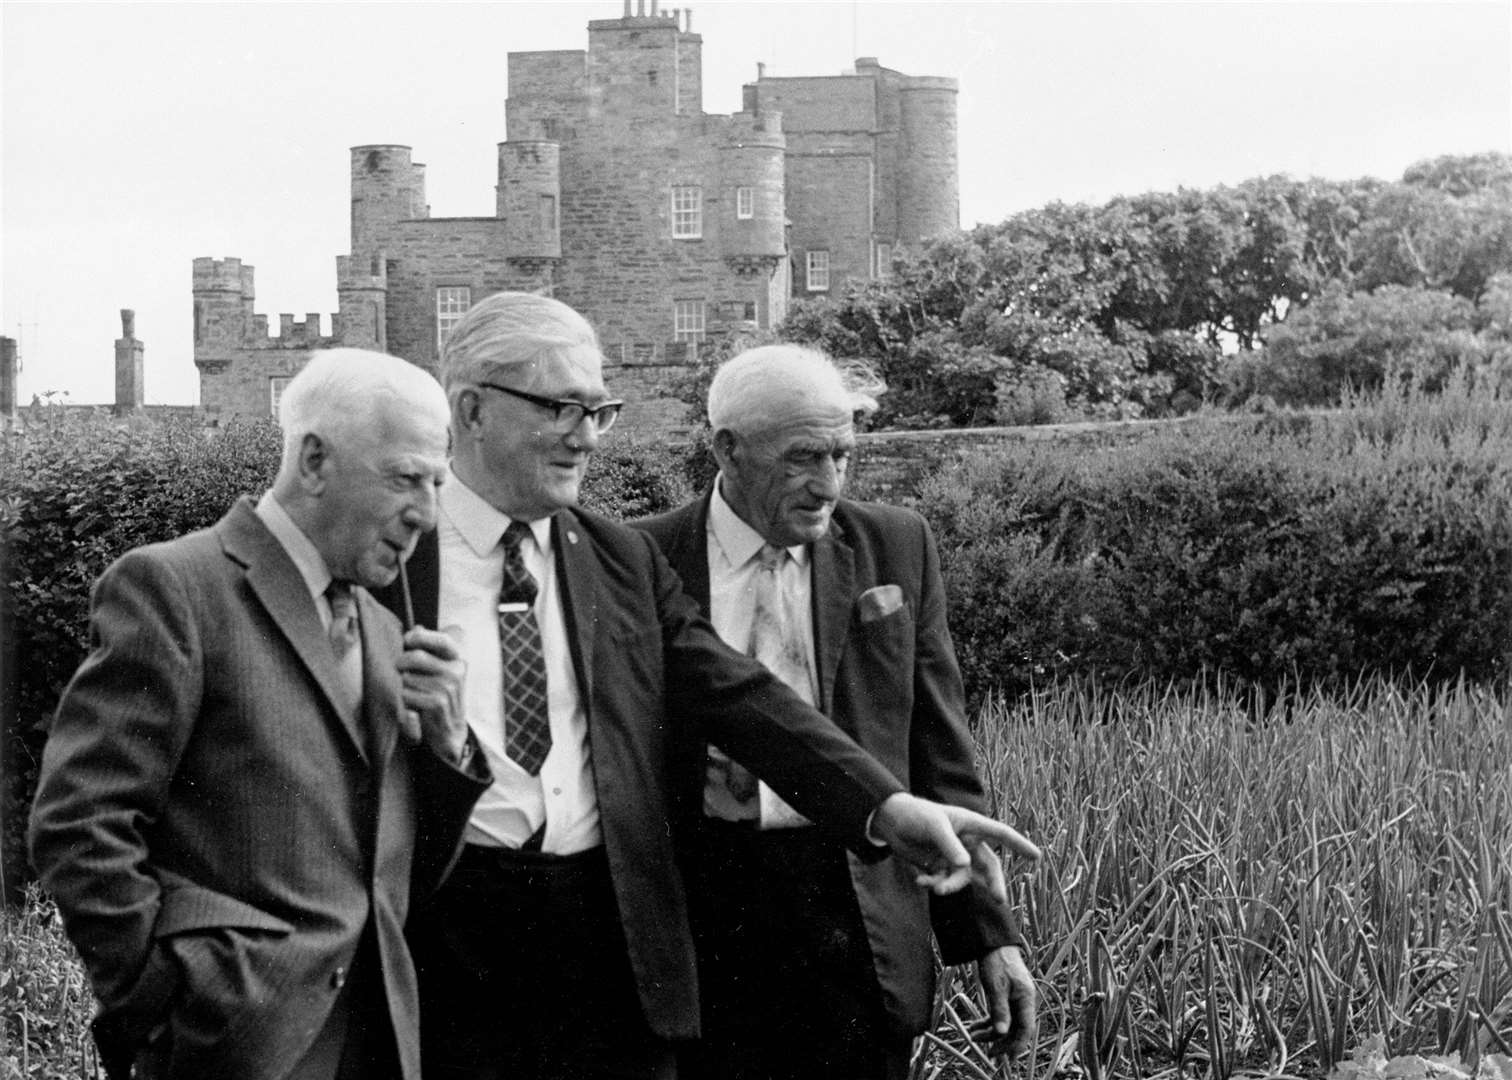 Retired members of the Dounreay Sports and Social Club were invited to visit the grounds and gardens of the Castle of Mey in 1977. From left: Walter Davie, Harry Adams and John Harper inspecting the vegetable plots. Jack Selby Collection / Thurso Heritage Society